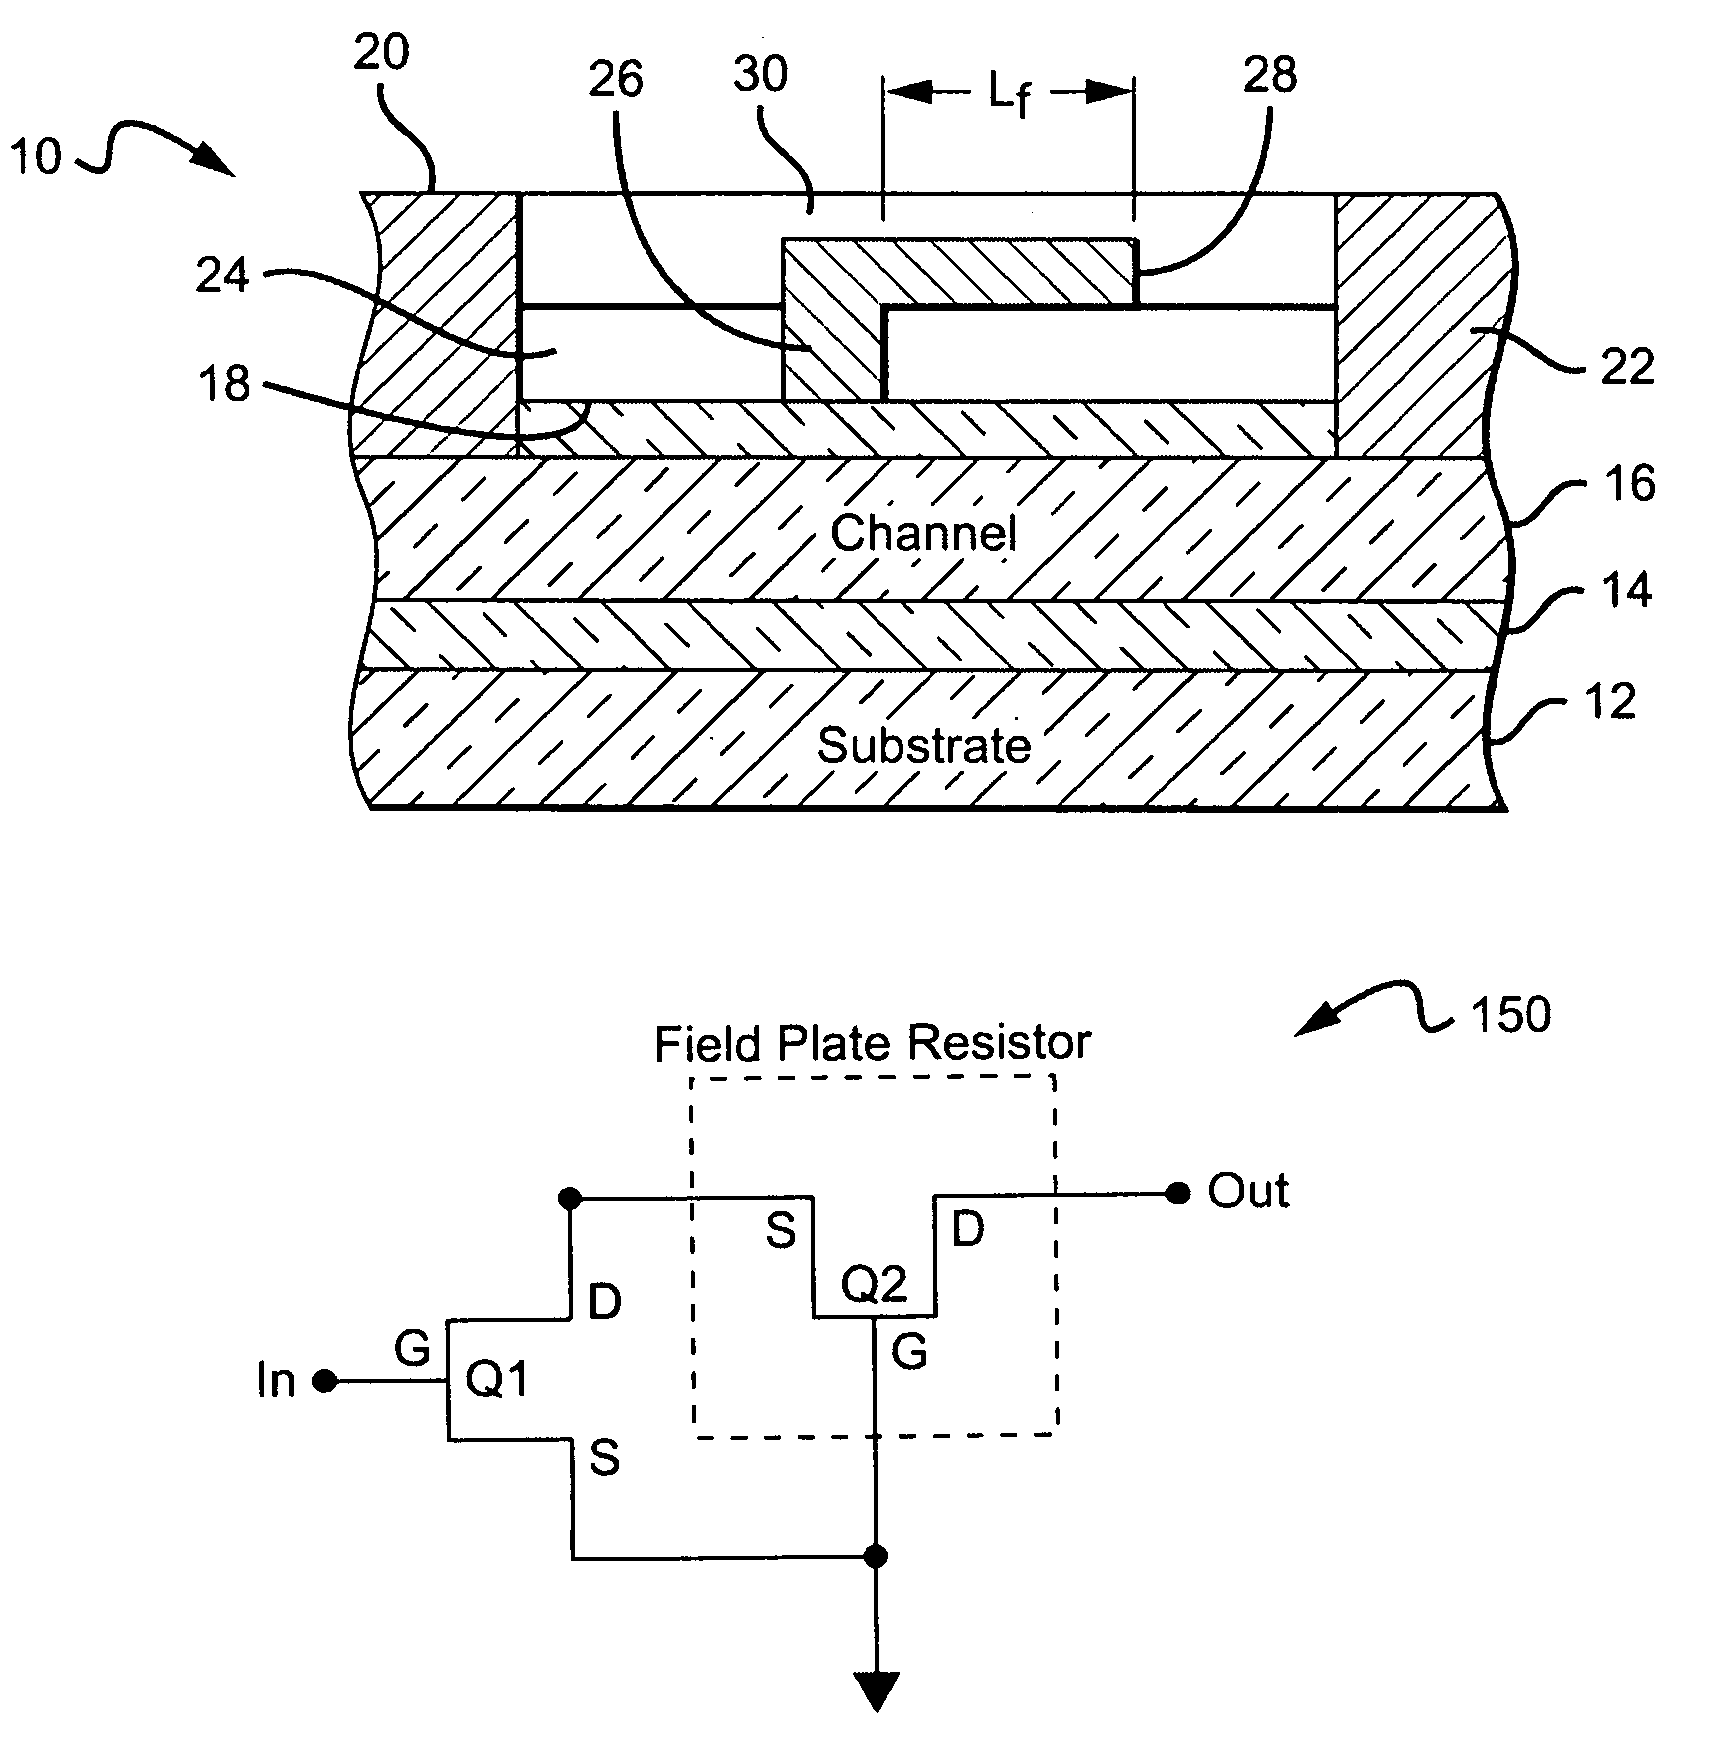 Cascode amplifier structures including wide bandgap field effect transistor with field plates